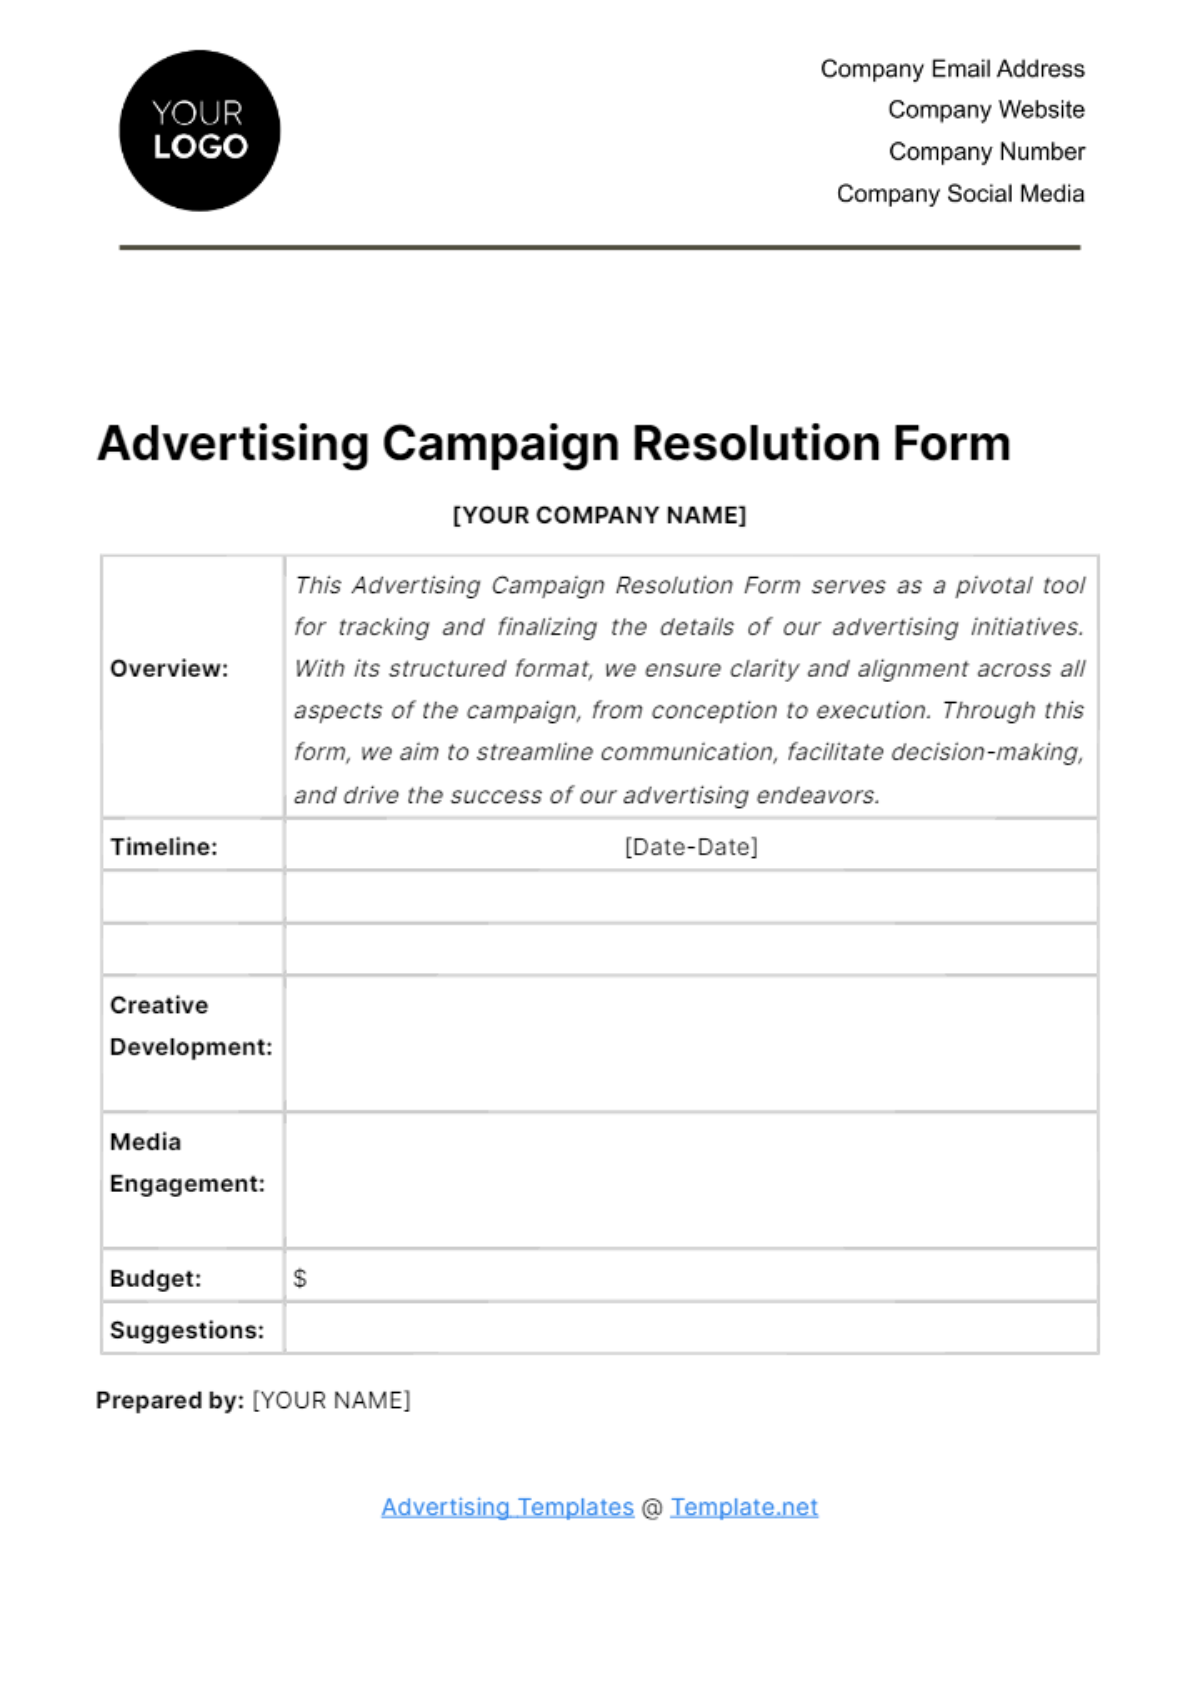 Advertising Campaign Resolution Form Template